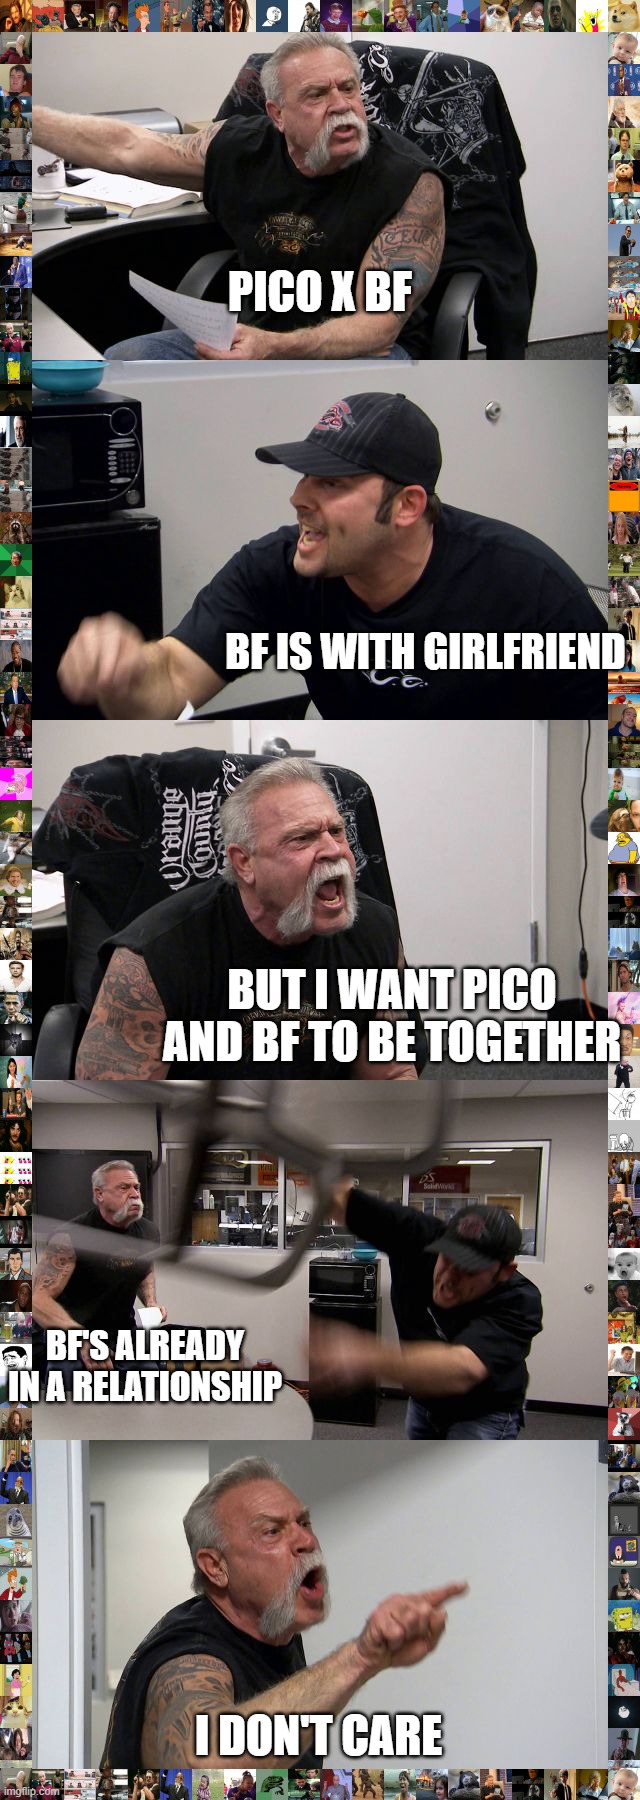 FNF MEME | PICO X BF; BF IS WITH GIRLFRIEND; BUT I WANT PICO AND BF TO BE TOGETHER; BF'S ALREADY IN A RELATIONSHIP; I DON'T CARE | image tagged in memes,american chopper argument,fnf | made w/ Imgflip meme maker